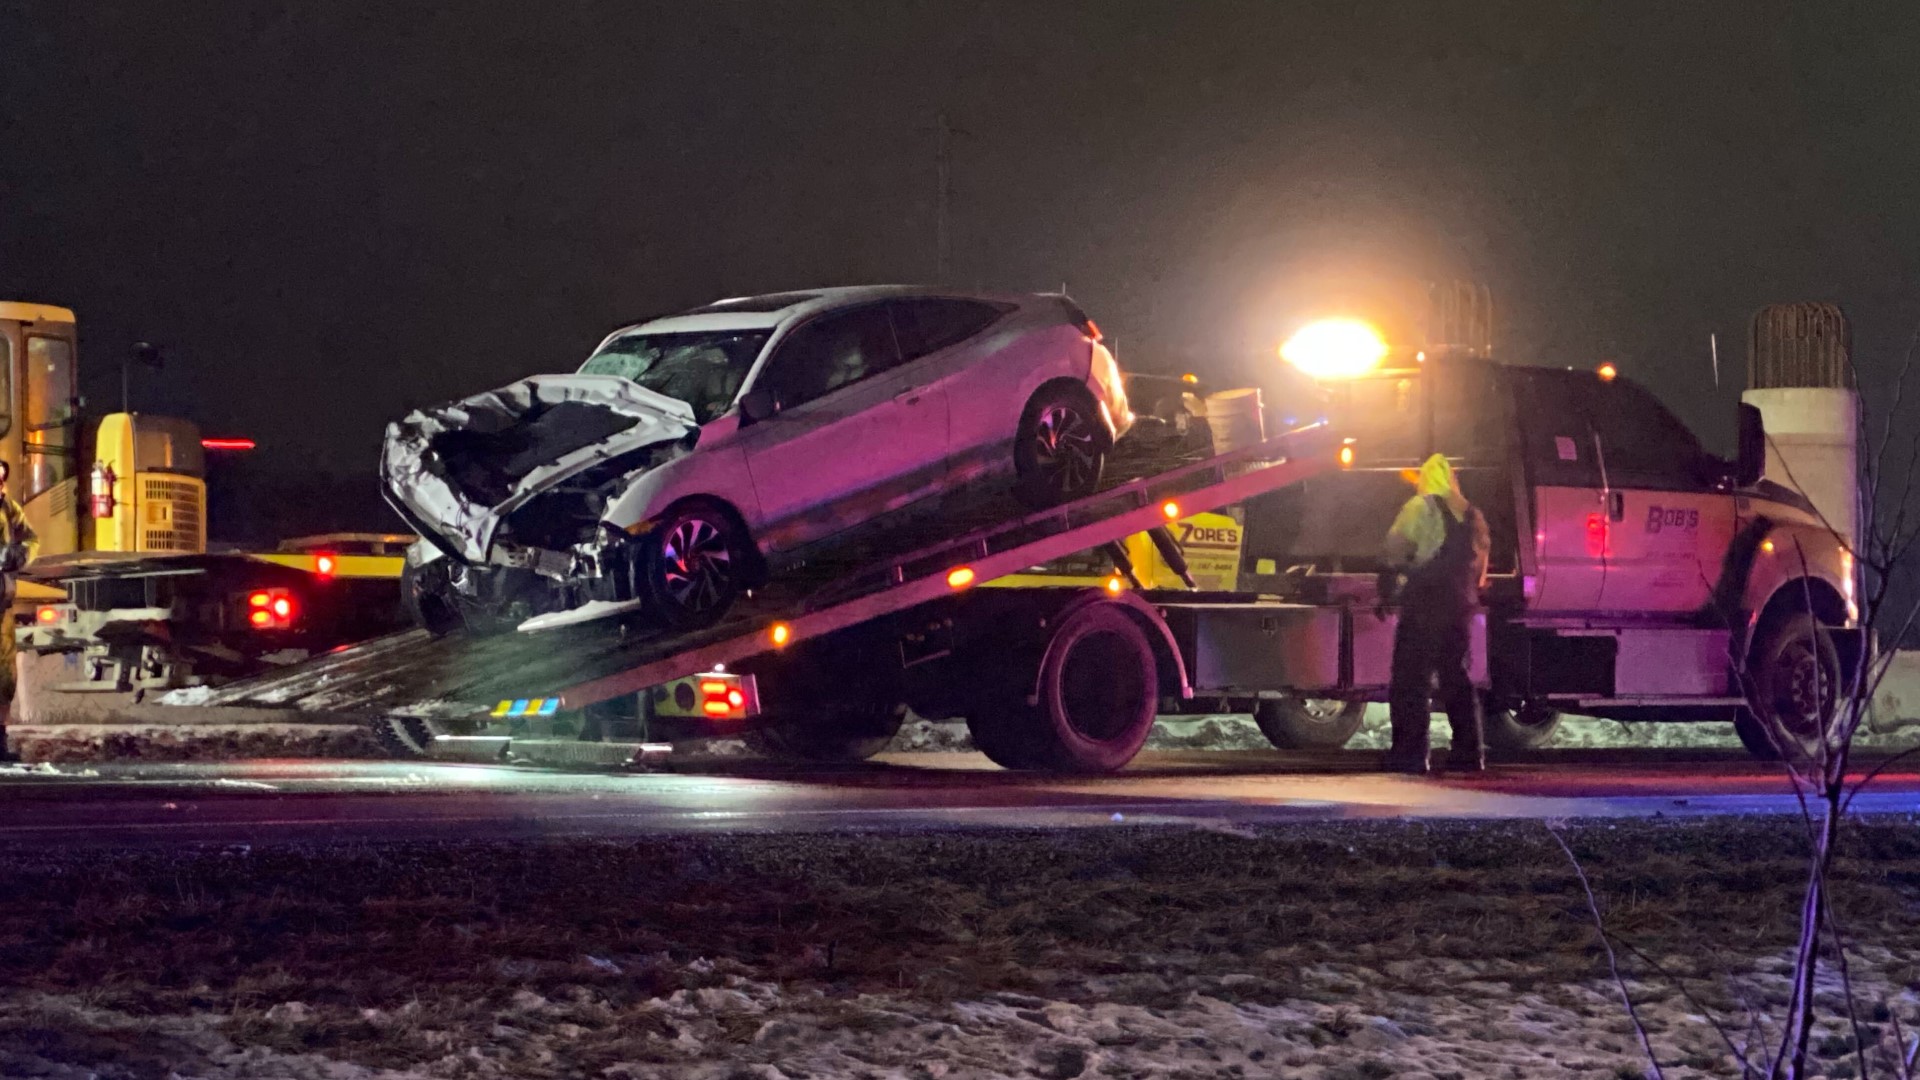 Three Whitestown officers were conducting a traffic stop when a white sedan struck one of the police vehicles, which then hit the other police vehicles at the scene.